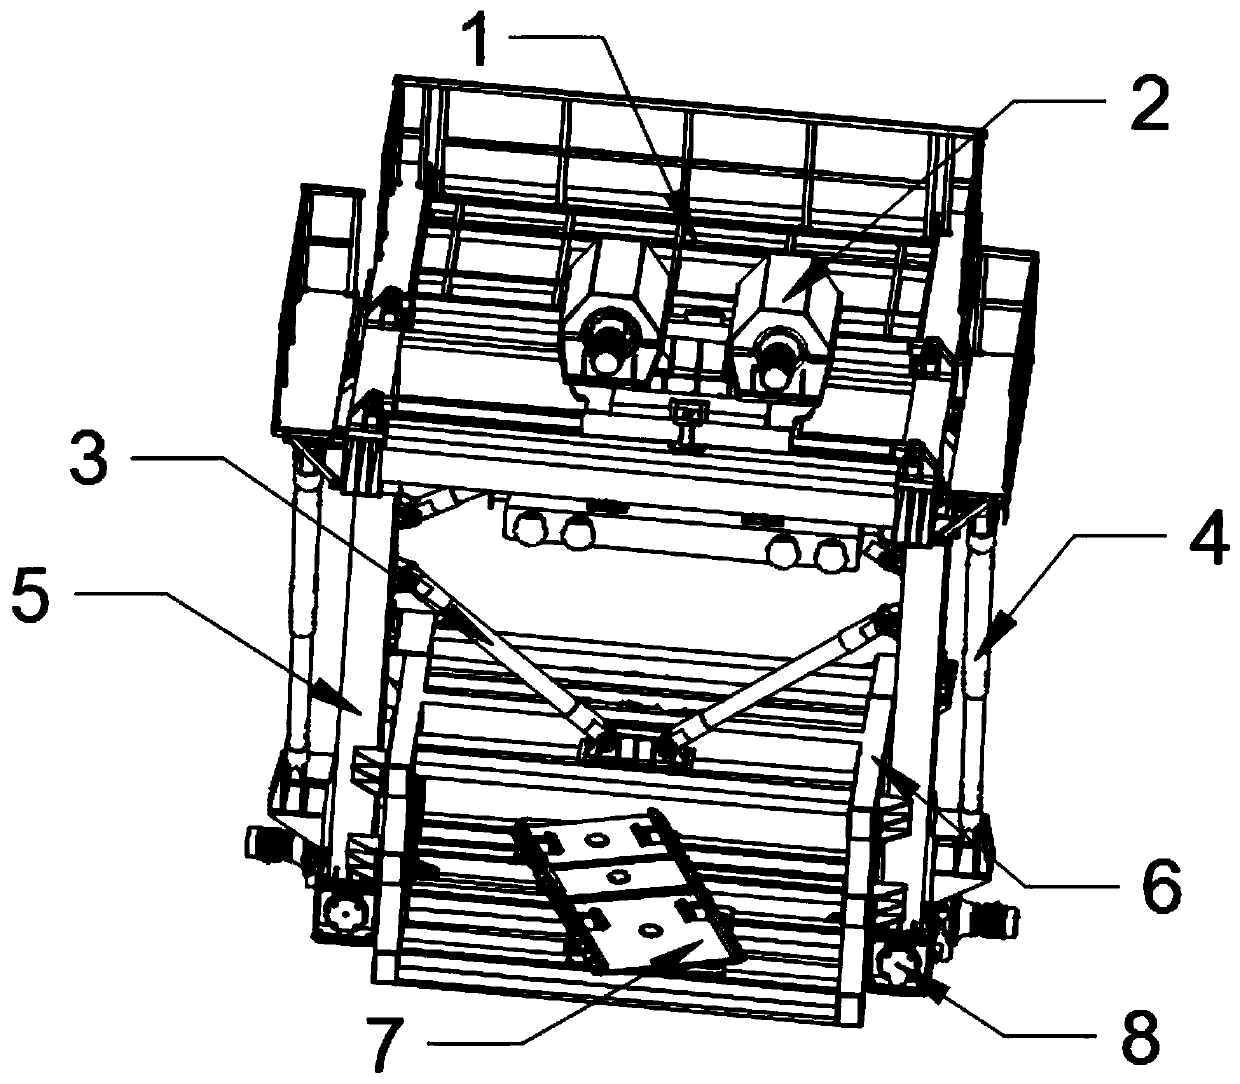 Connecting structure of main beam and supporting legs of bridge girder erection machine